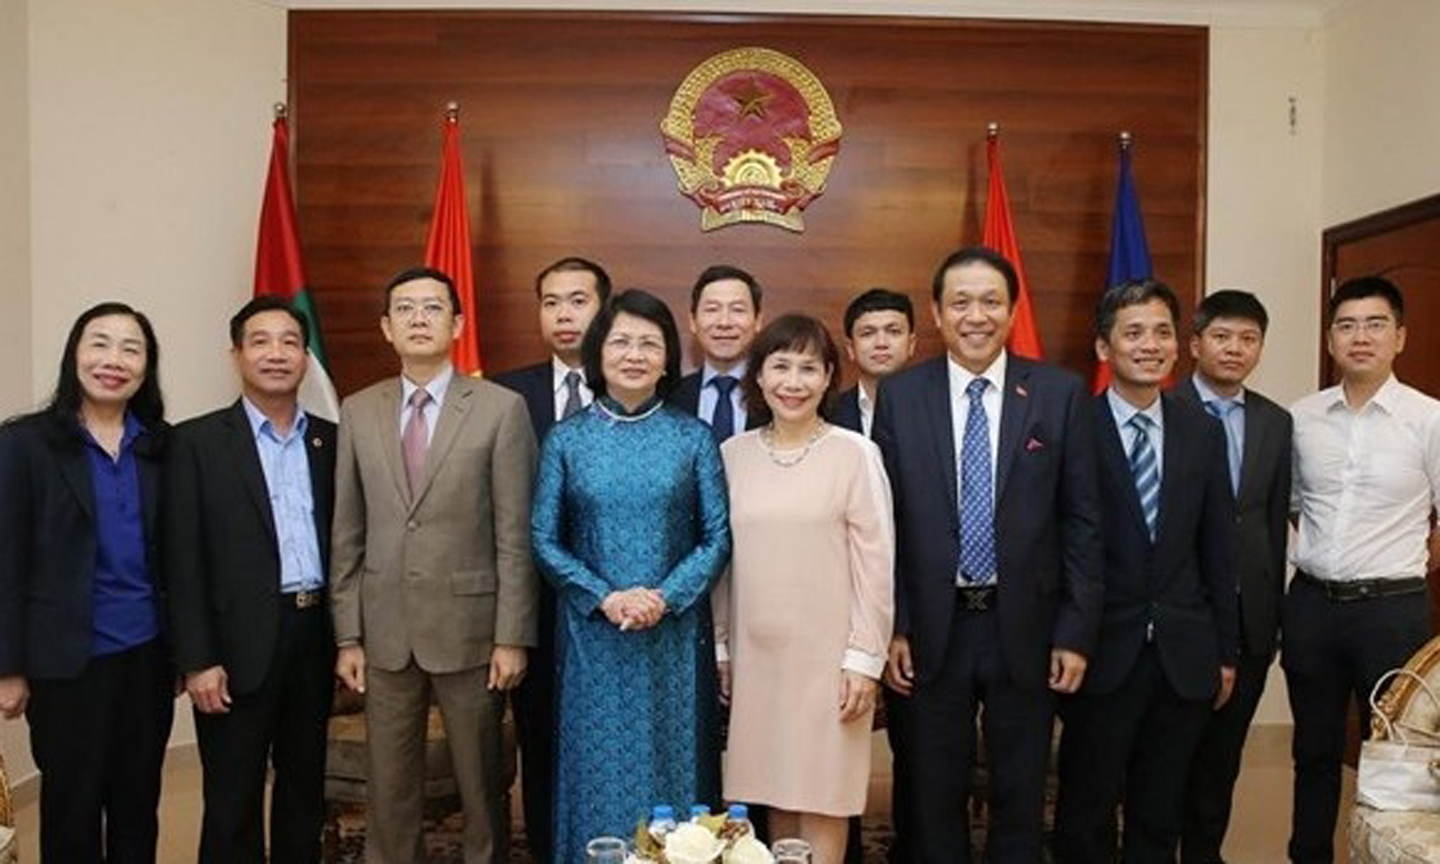 Vice President Dang Thi Ngoc Thinh (fourth from left) poses with officials and employees at the Vietnamese Embassy in the UAE. (Photo: VNA)